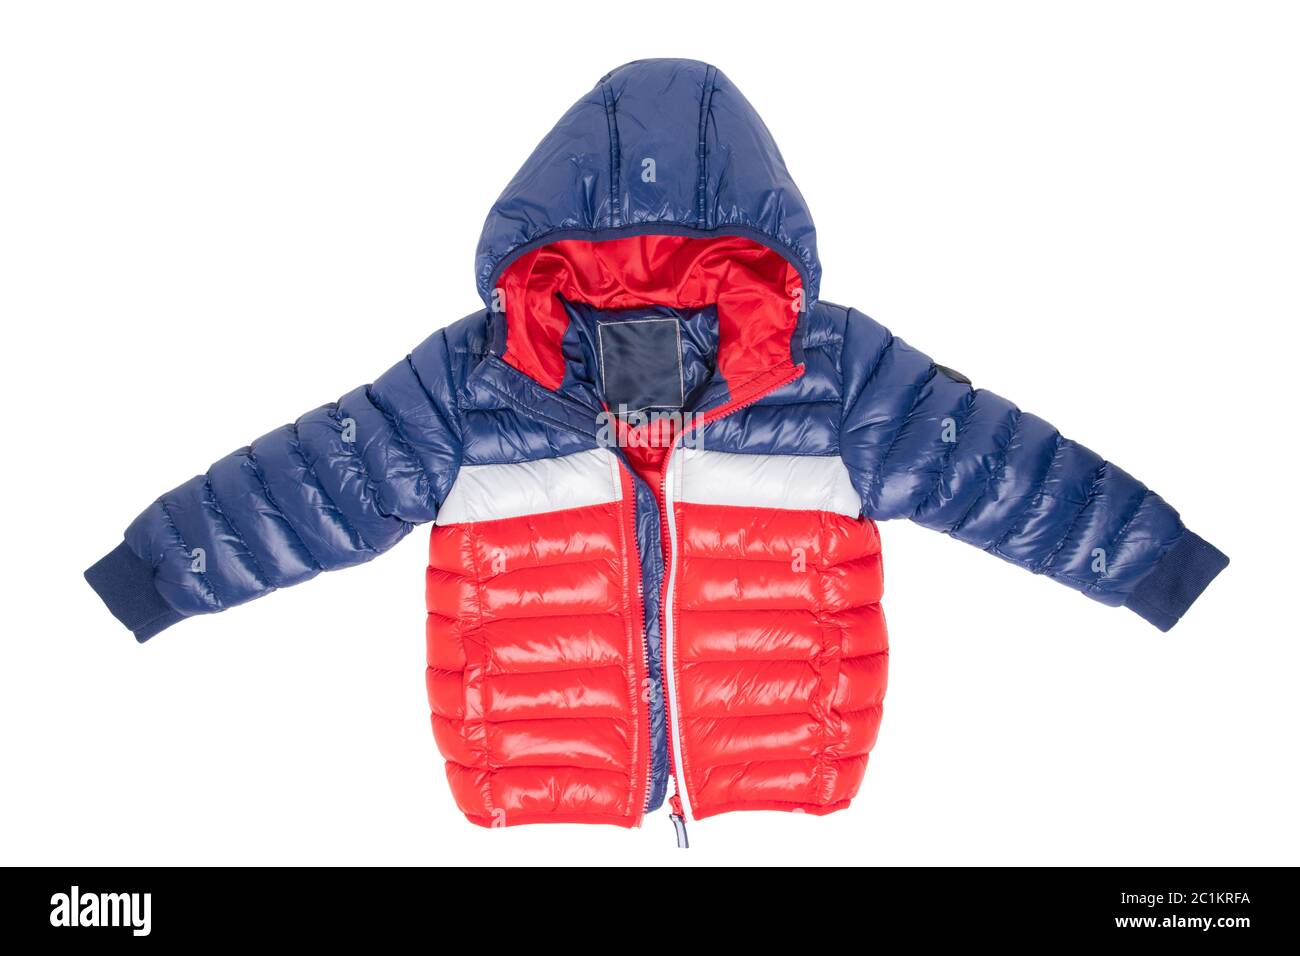 Winter jacket isolated. A stylish blue and red warm down jacket with red lining for the kids is isolated on a white background. Childrens wear with hood for spring and autumn. Stock Photo